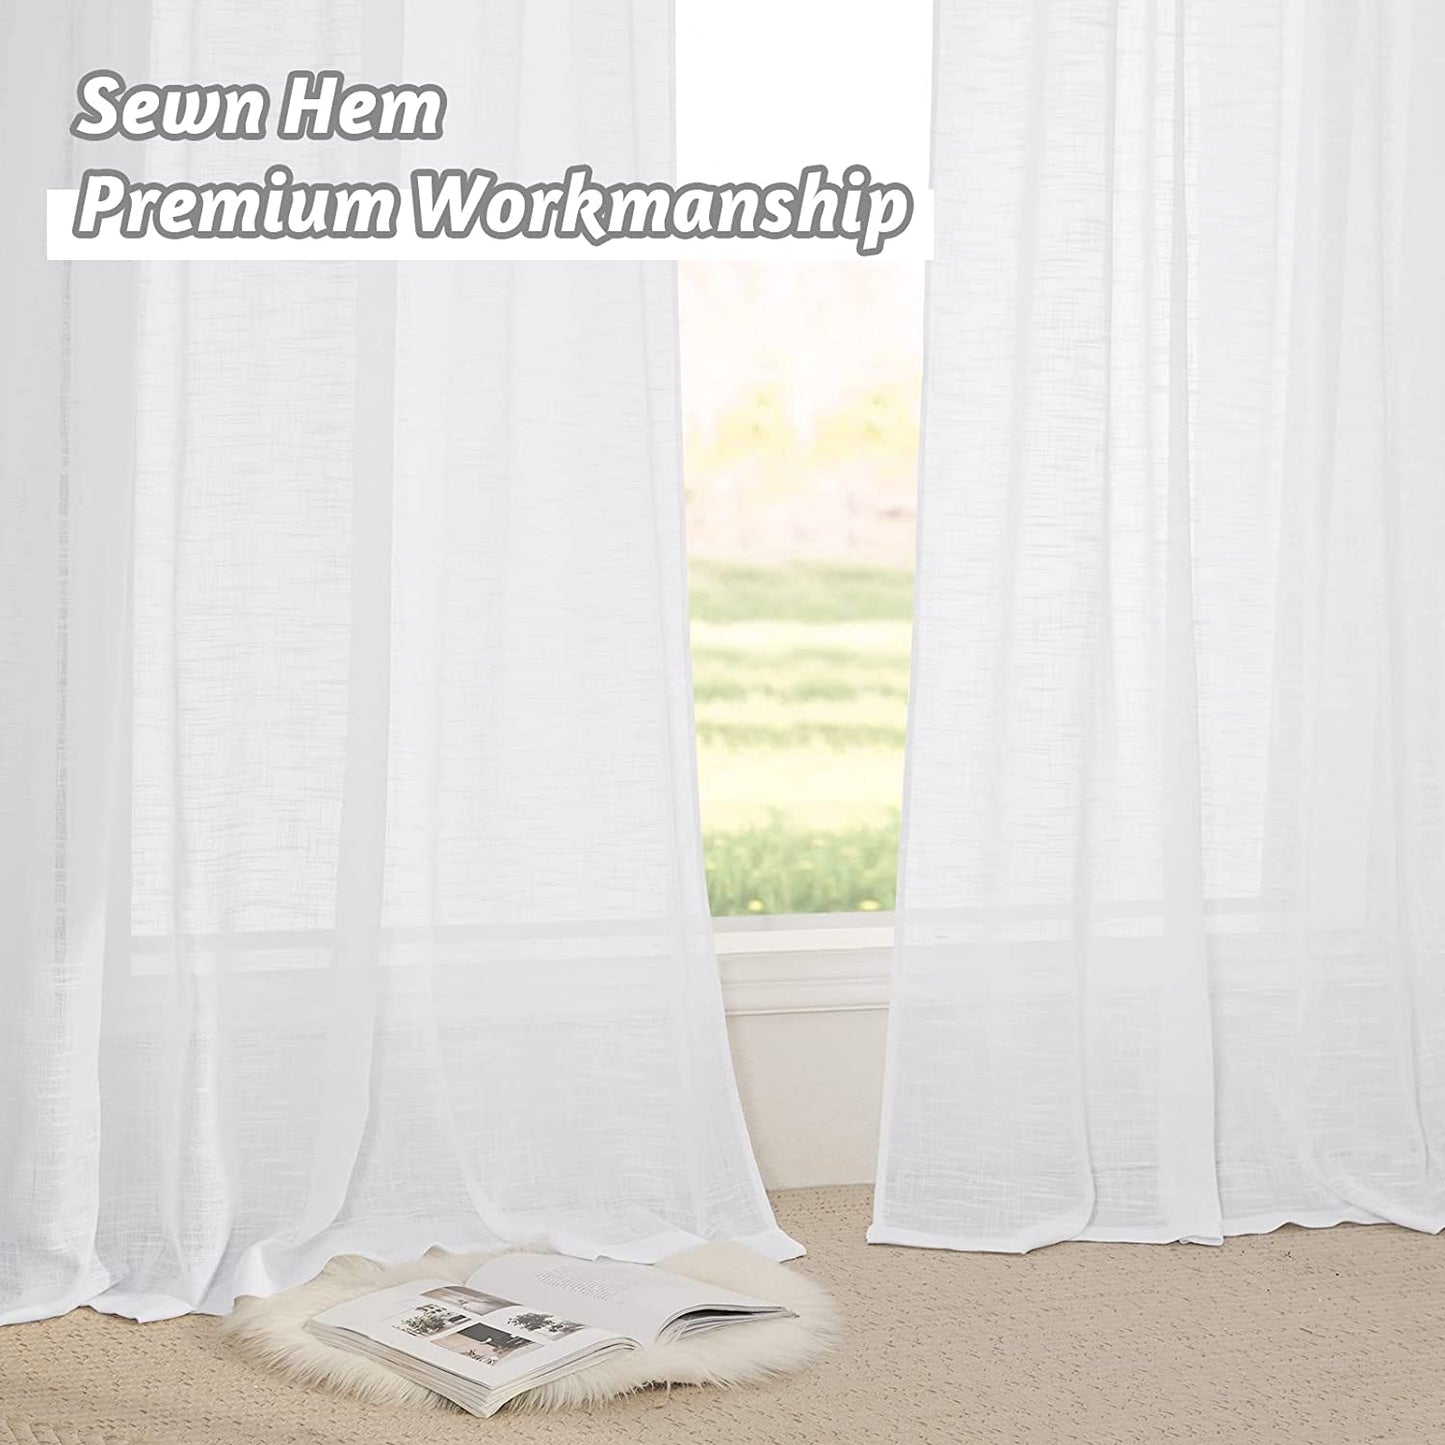 RYB HOME White Curtains Sheer - Linen Texture Semi Sheer Window Covering, Light & Airy Privacy Sheer Panels for Bedroom Living Room Patio Glass Door, 52 Inch Width X 95 Inch Length, Set of 2  RYB HOME   